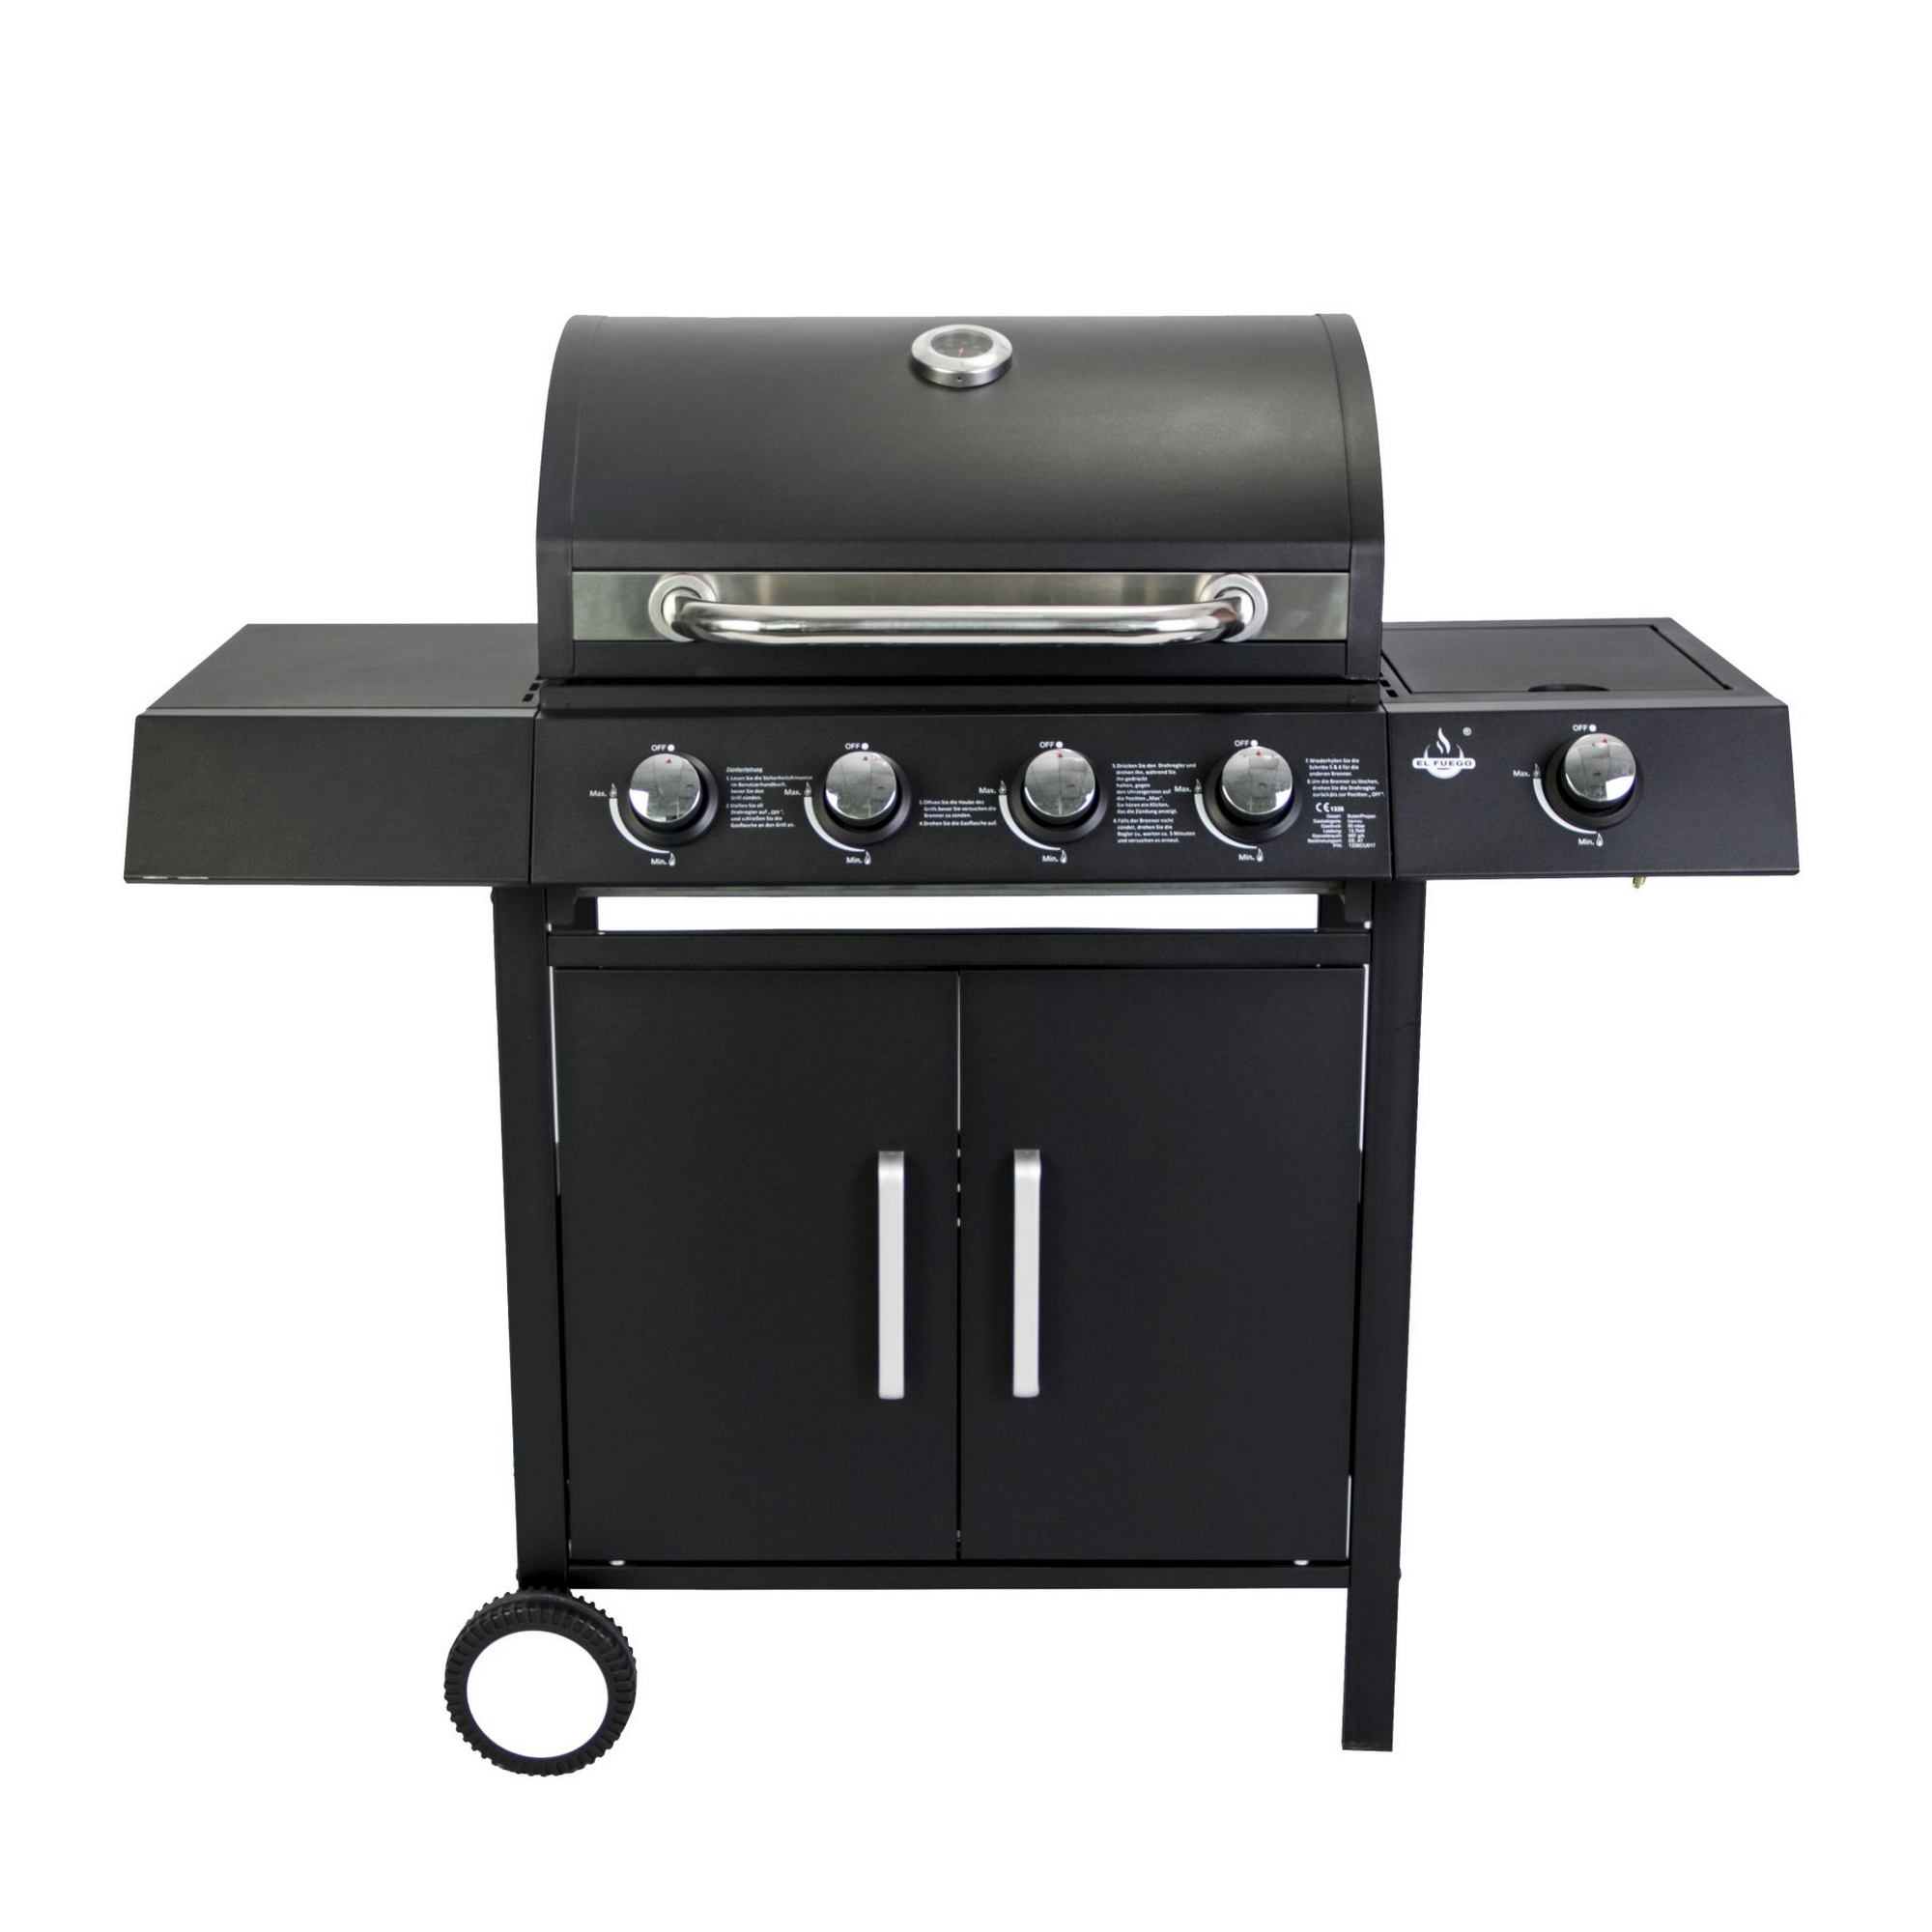 Gasgrill 'San Angelo' schwarz 110 x 120 x 48 cm + product picture